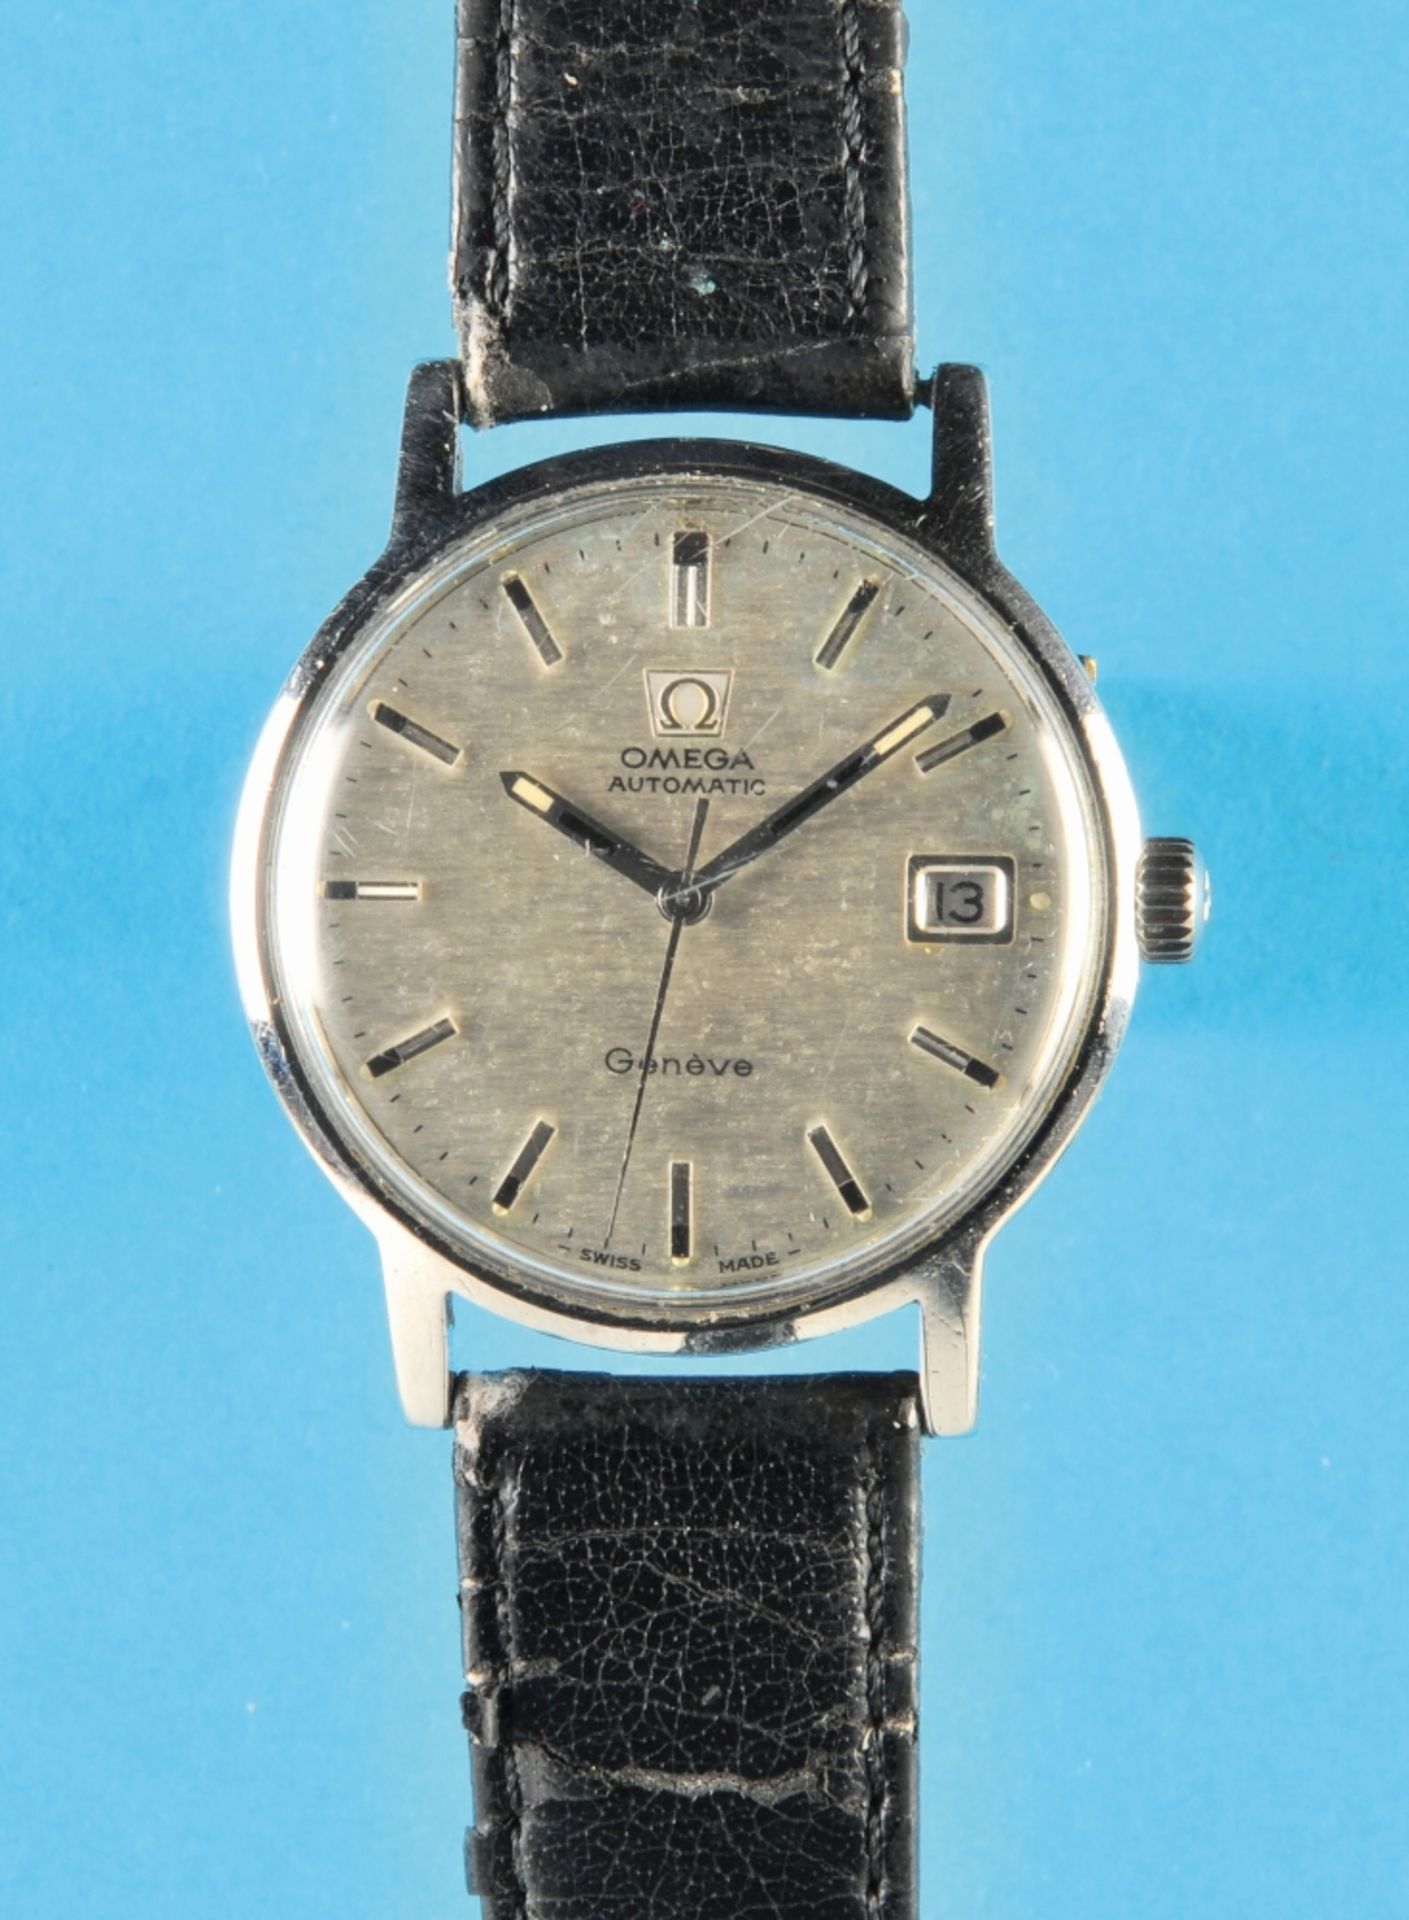 Omega Automatic wristwatch with date and center seconds, Case with steel screw back, cal. 166.070,